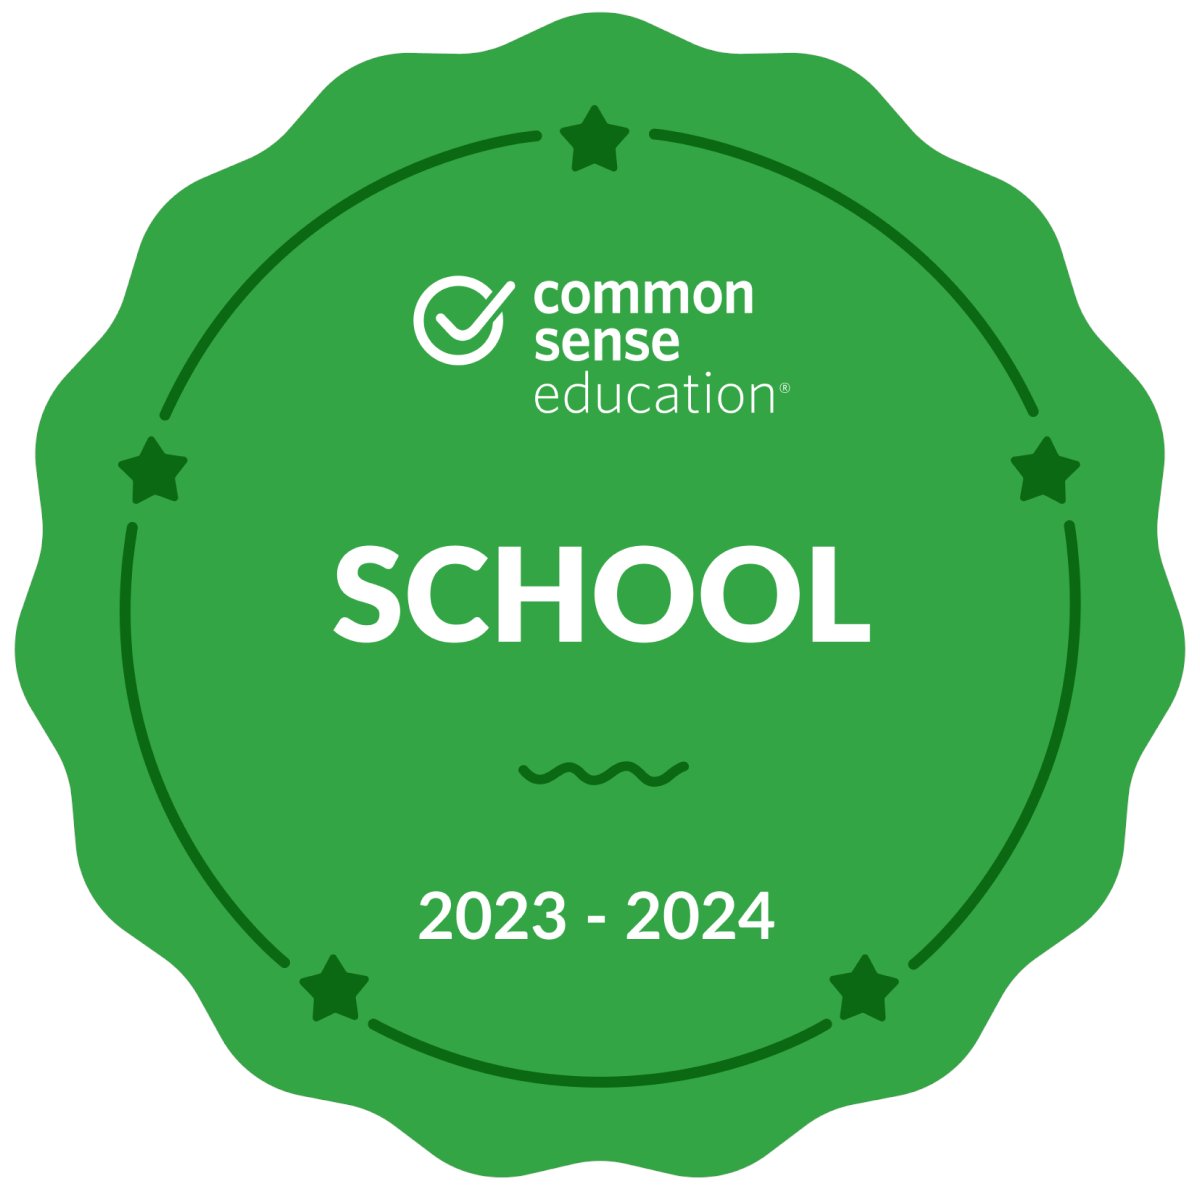 An honor to be recognized for teaching digital citizenship to our students.  The recognition acknowledges our school's commitment to helping Ss build skills that are essential for their well-being today & for the opportunities they'll have tomorrow.  #CommonSenseSchool